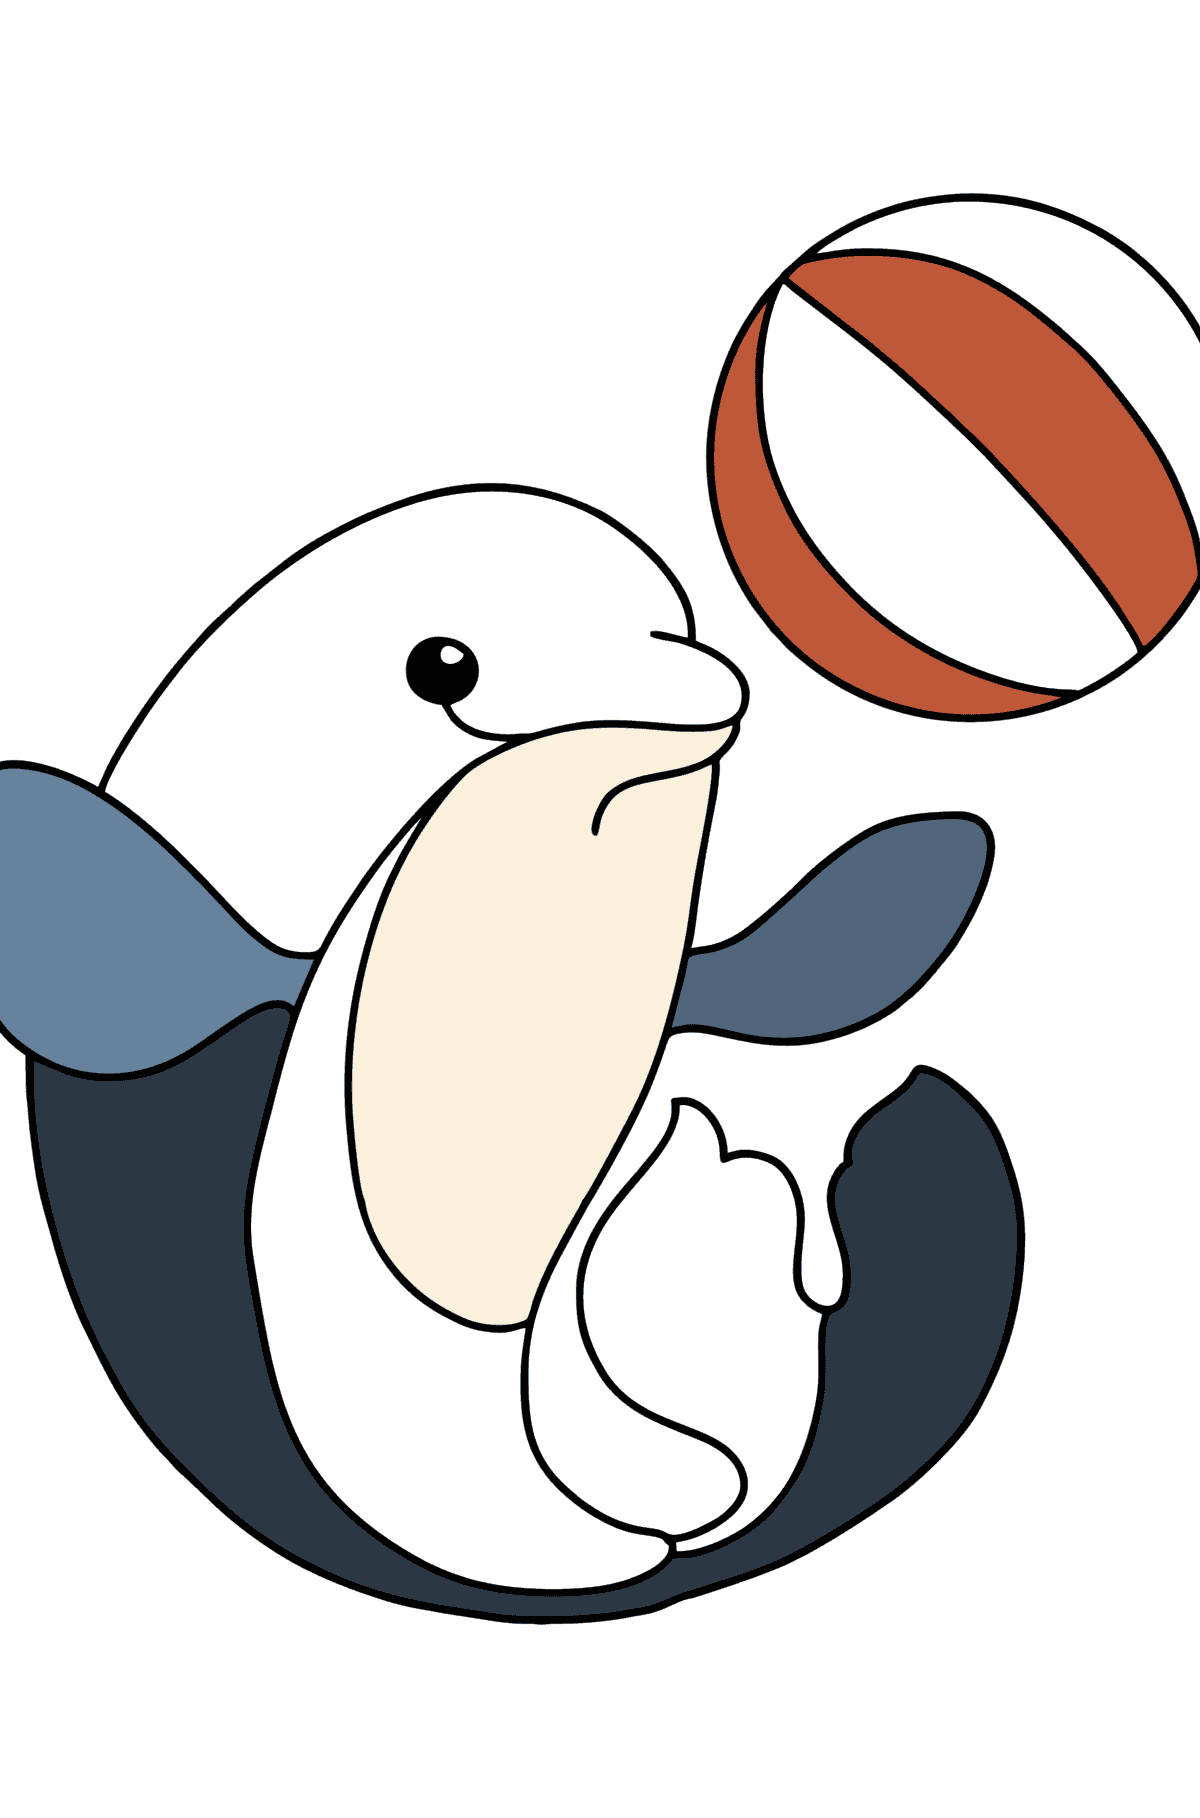 Dolphin Playing coloring page - Coloring Pages for Kids